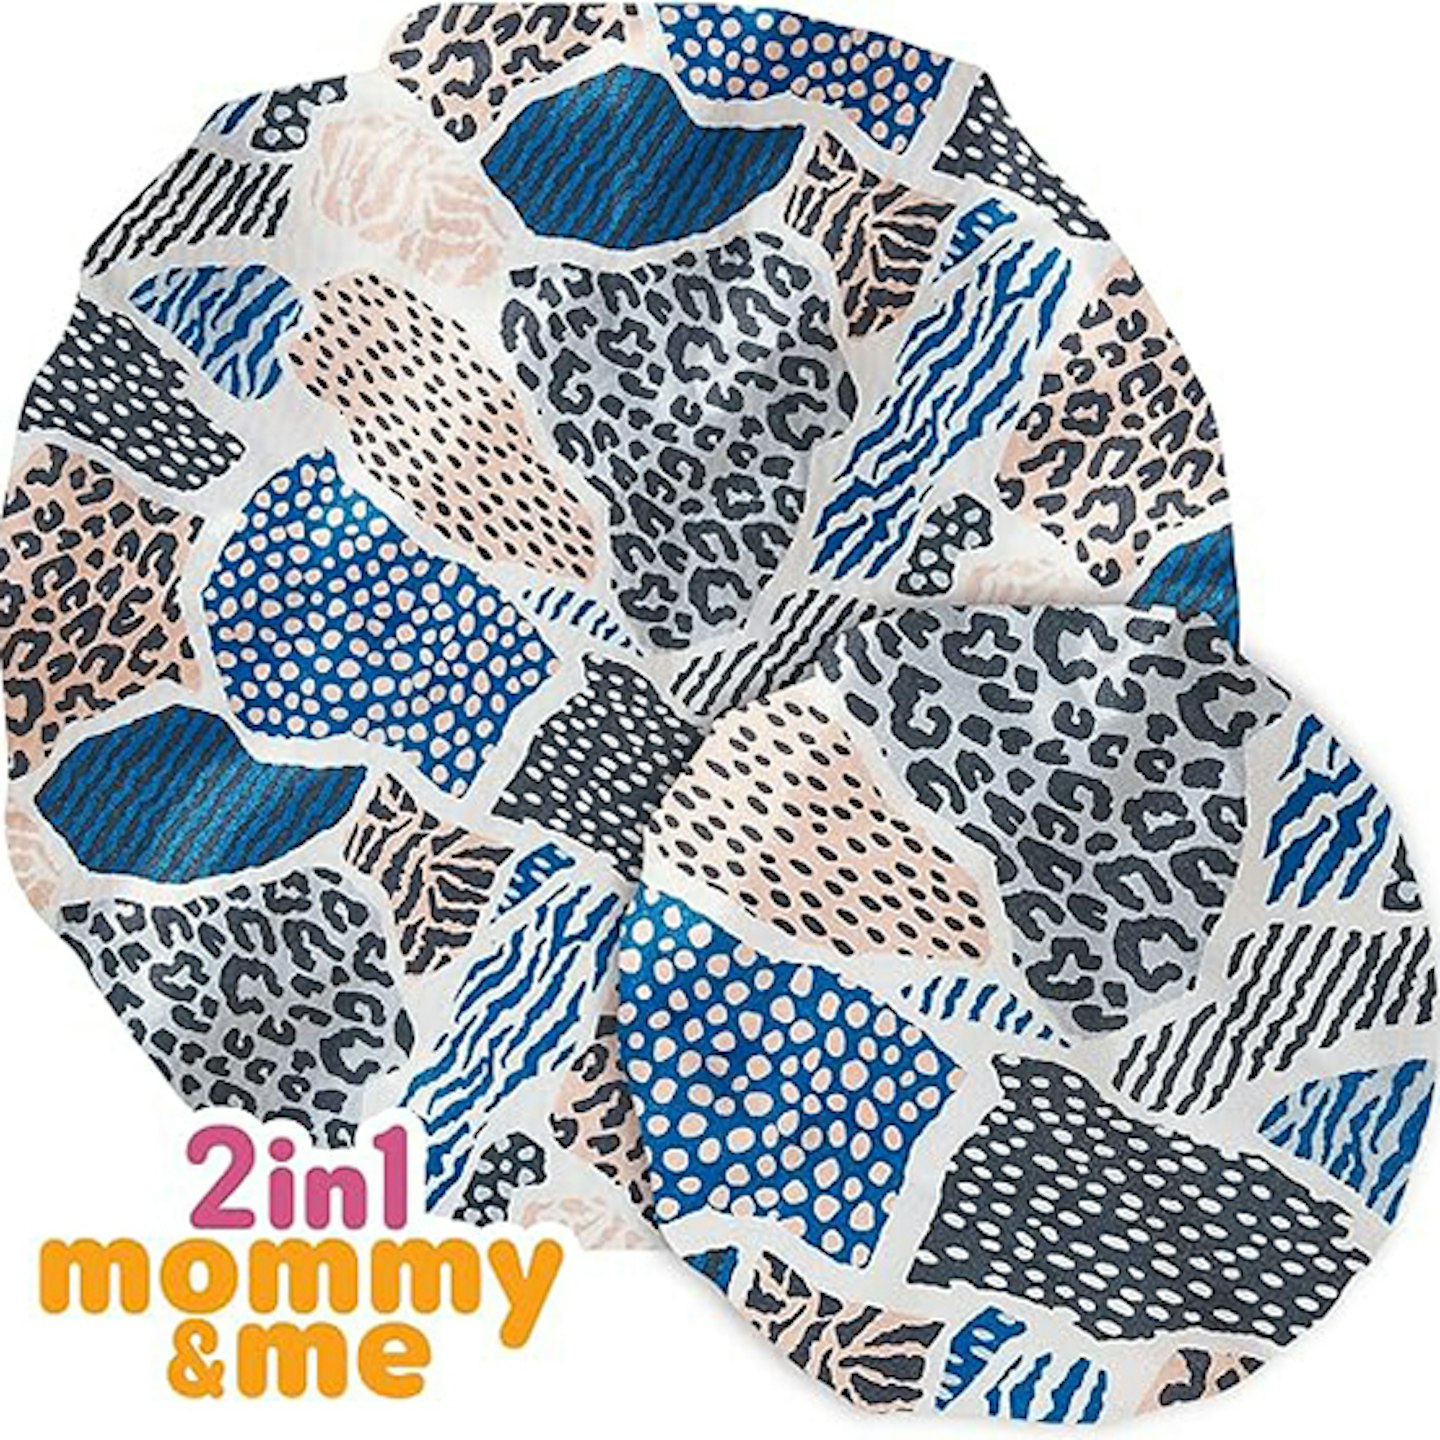 RED 2 in 1 mommy and me bonnets